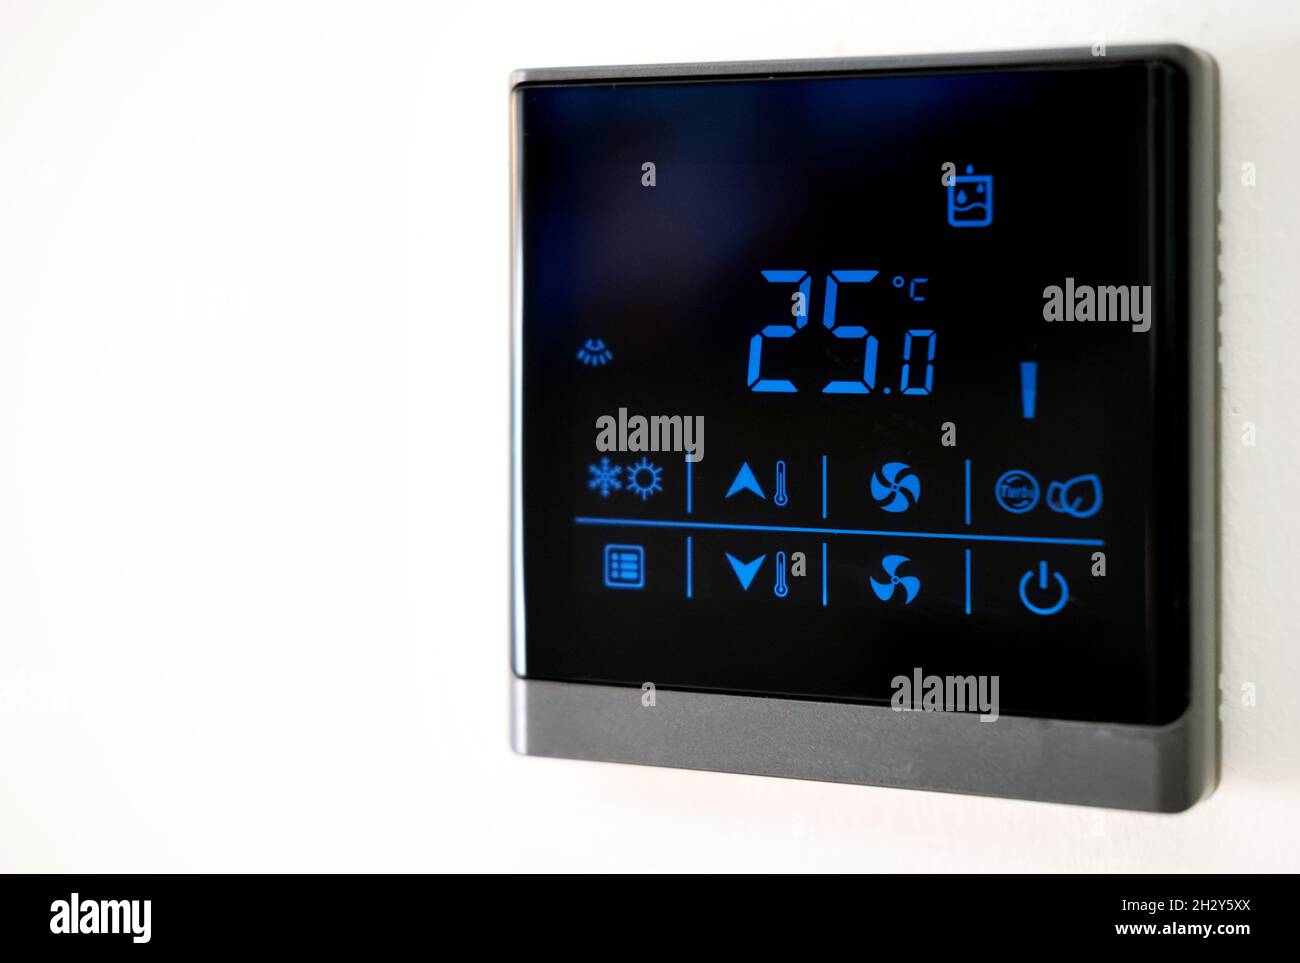 https://c8.alamy.com/comp/2H2Y5XX/wall-mounted-digital-display-of-air-conditioning-system-on-white-background-equipment-inside-modern-house-close-up-view-modern-technology-comfort-2H2Y5XX.jpg